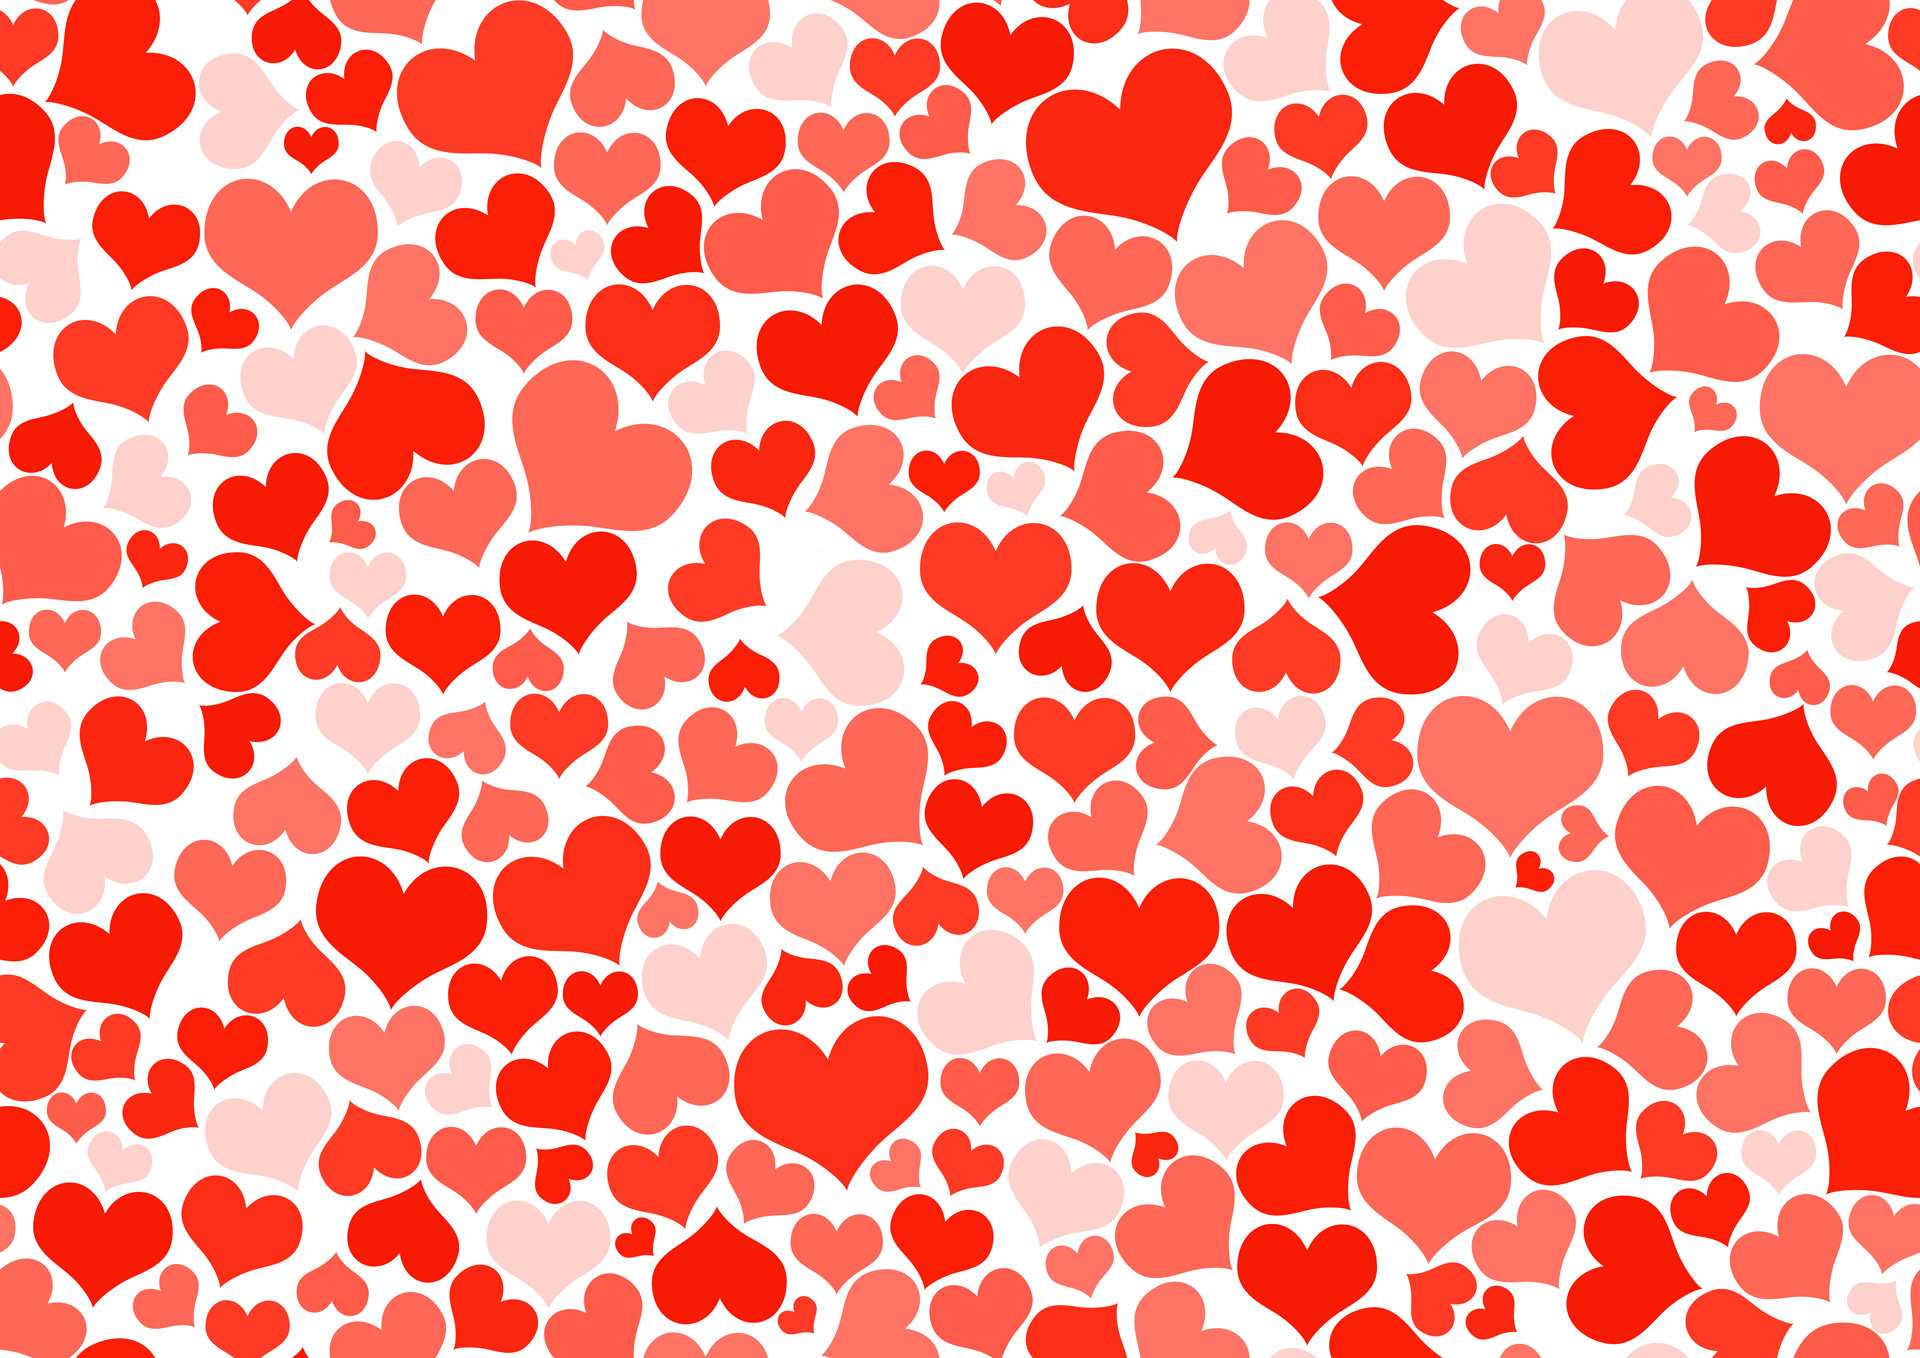 1920x1358 Red Hearts Wallpaper | Free Images at vector clip art online, royalty free \u0026 public domai